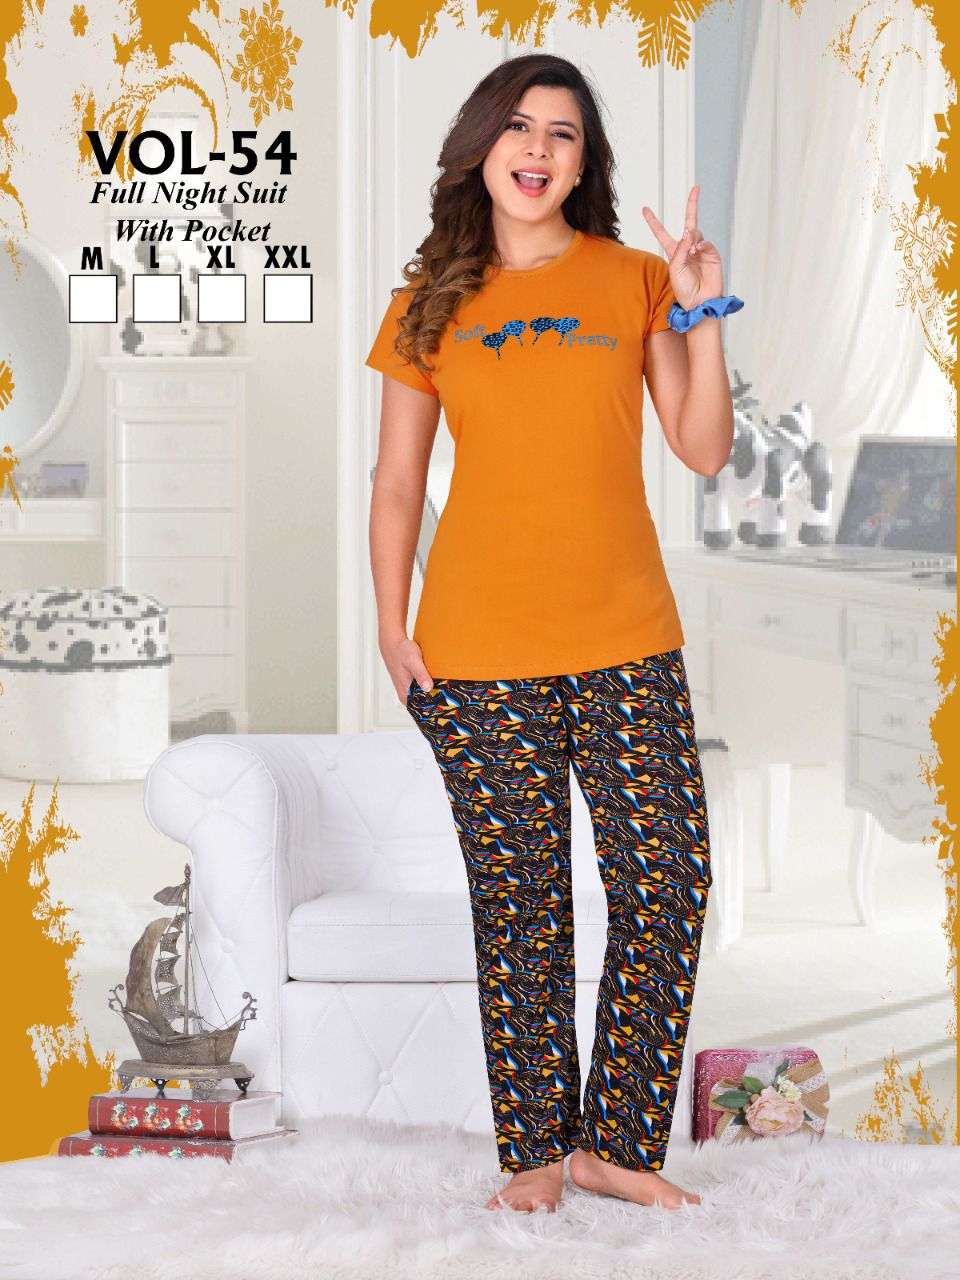 FASHION TALK NEW VOL.54 Heavy Shinker Hosiery Cotton Night Suits With Pocket CATLOG WHOLESALER BEST RATE